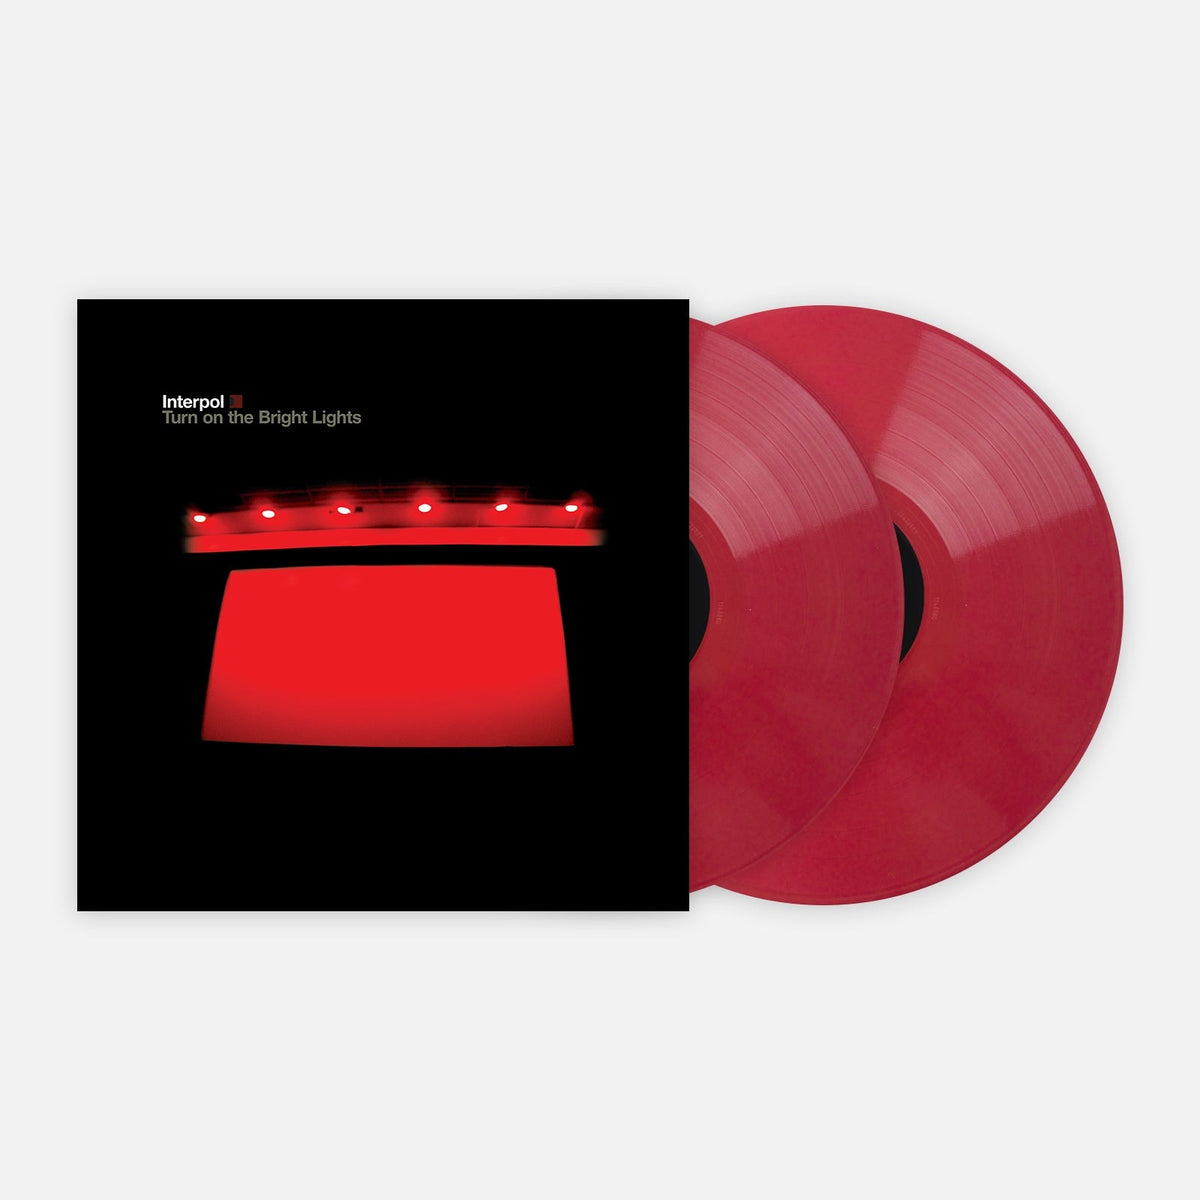 Interpol - Turn On the Bright Lights 2LP (Vinyl Me Please Exclusive, Remastered, Red Vinyl)